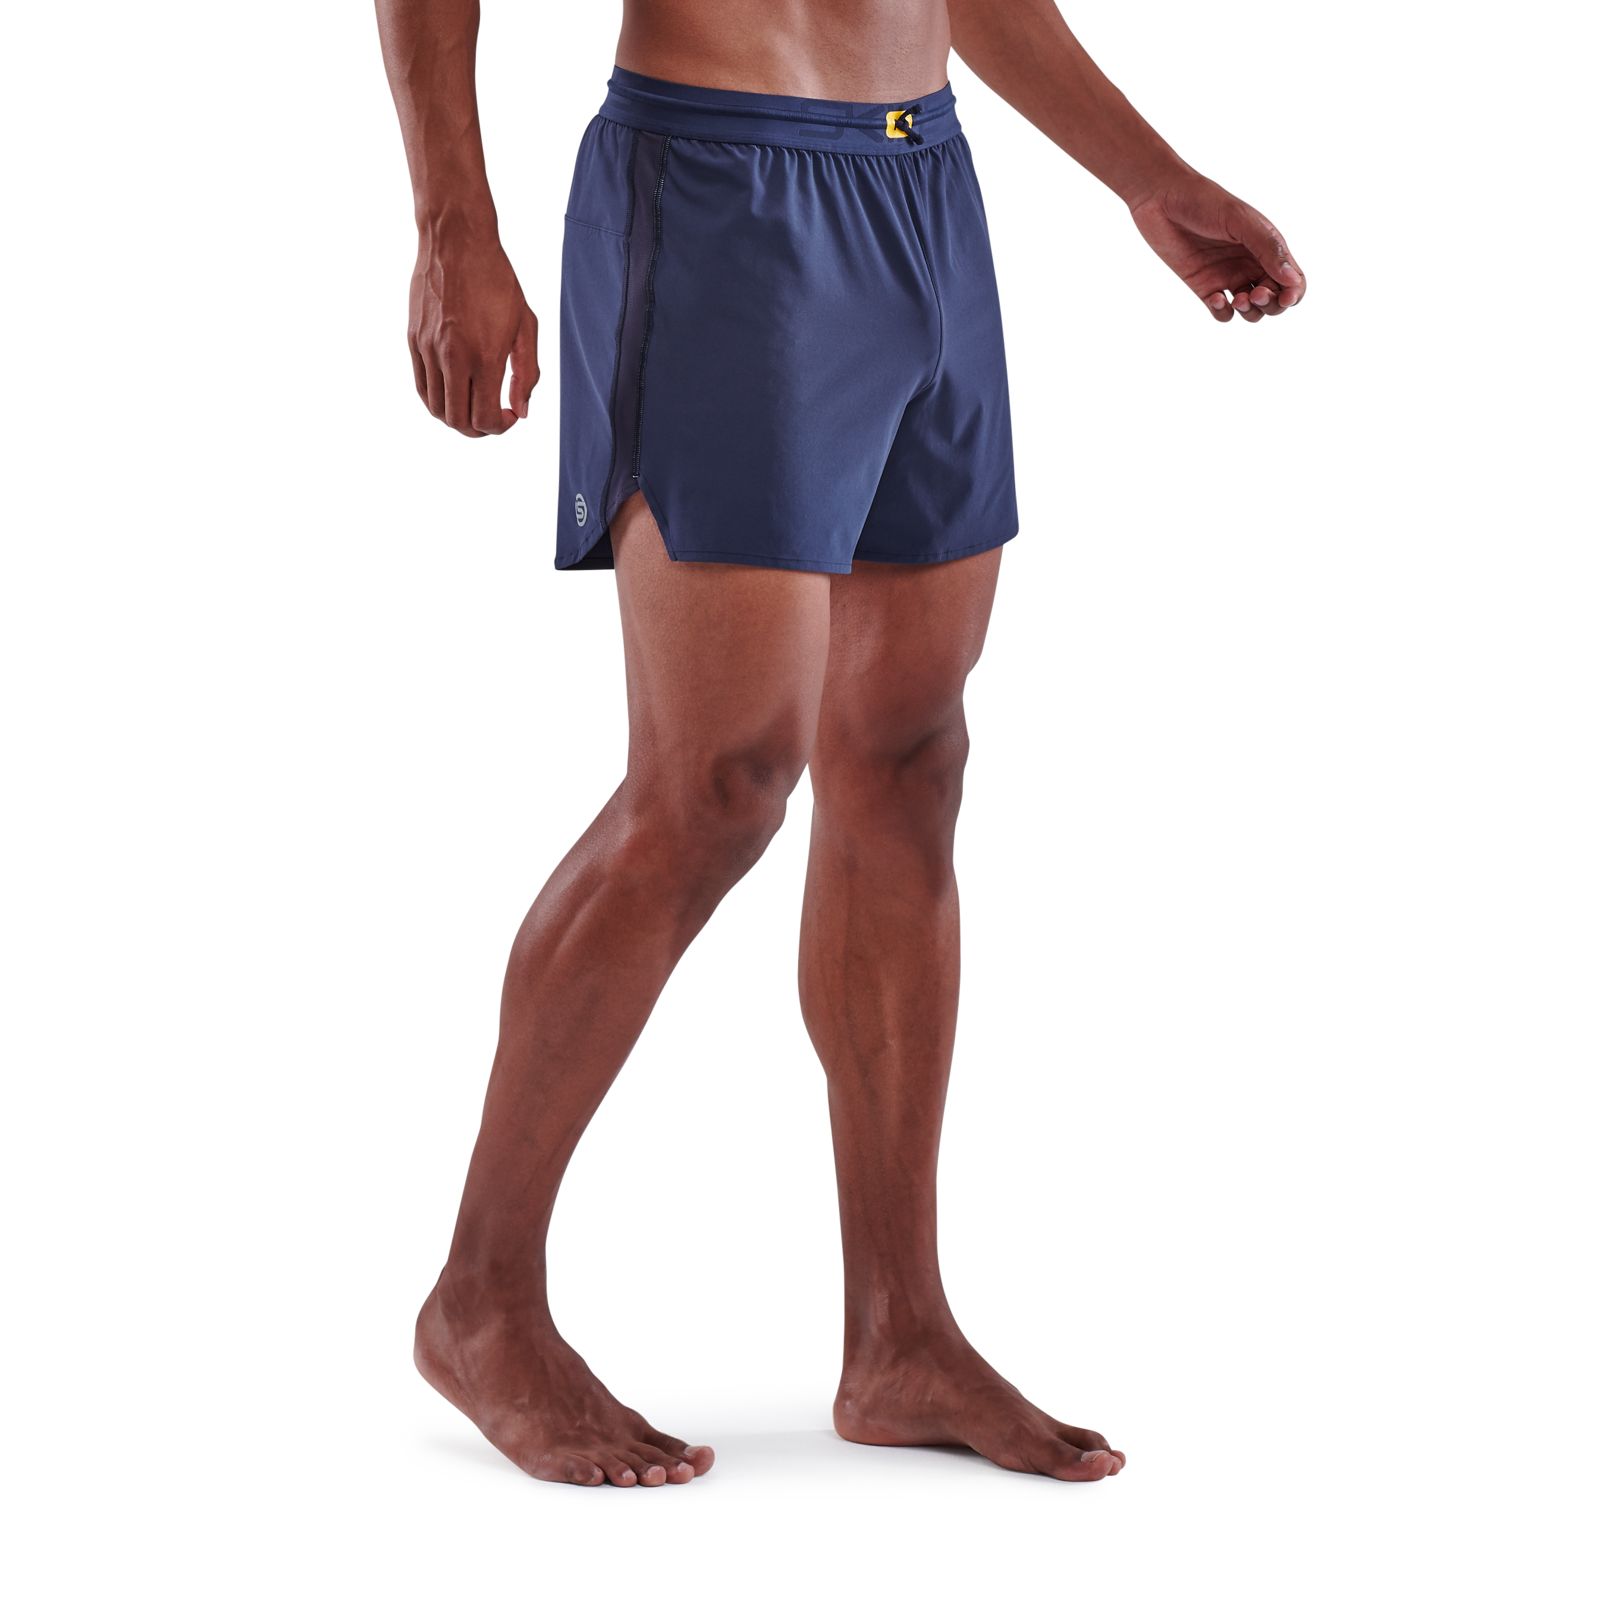 Skins Mens Series 3 X-Fit Shorts Pants Trousers Bottoms Navy Blue Sports Running 